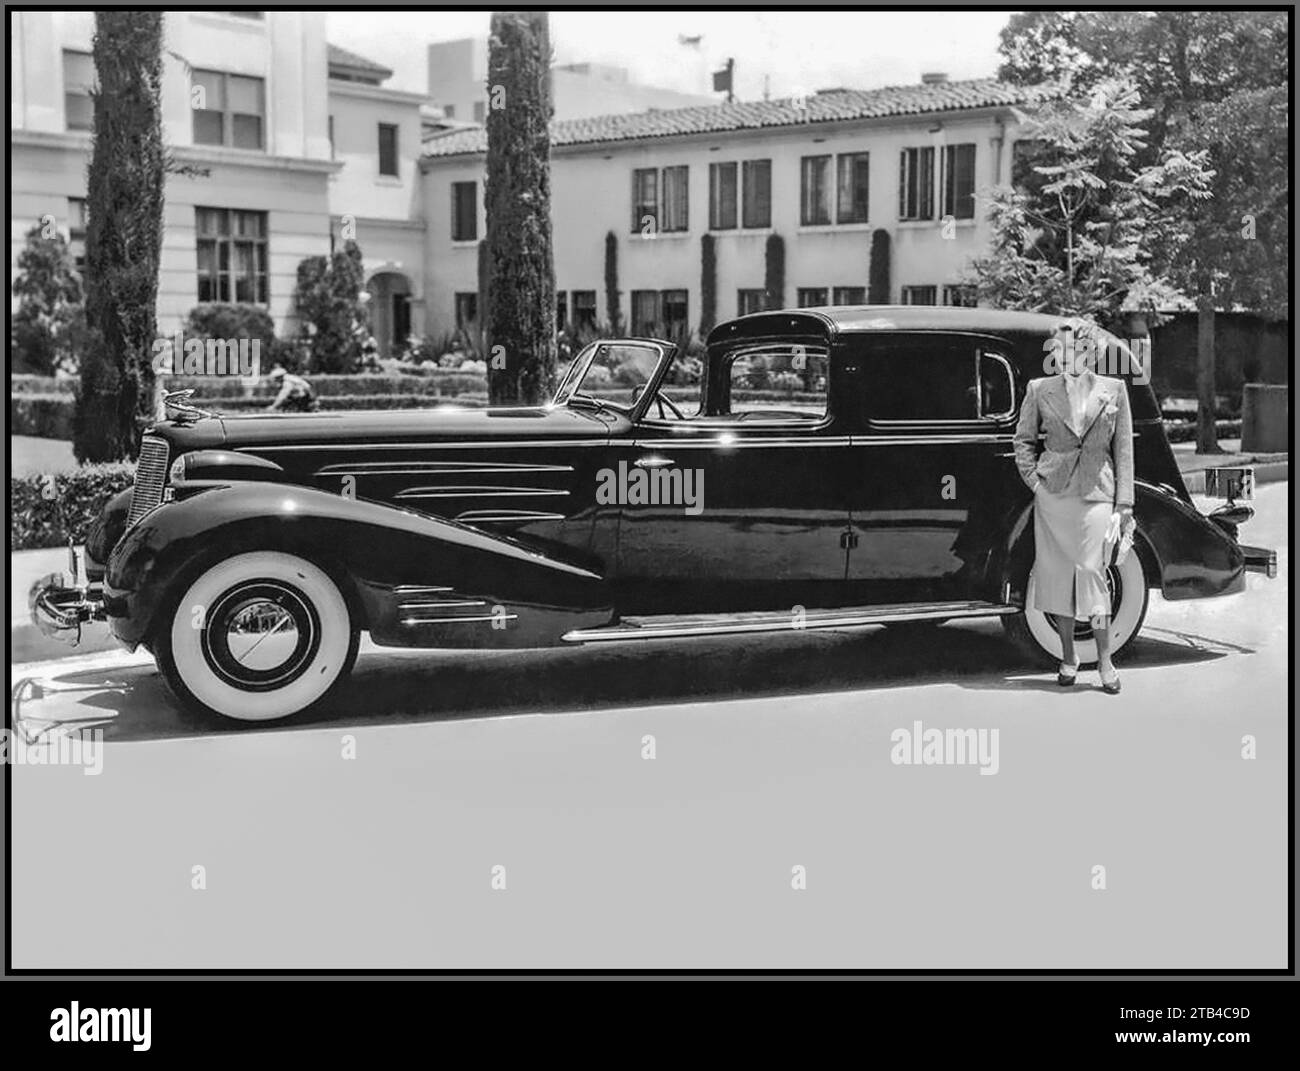 DIETRICH Cadillac V16 452-D Town Car 1930s, with Hollywood actress Marlene Dietrich, posing outside with the Cadillac. Hollywood USA Stock Photo